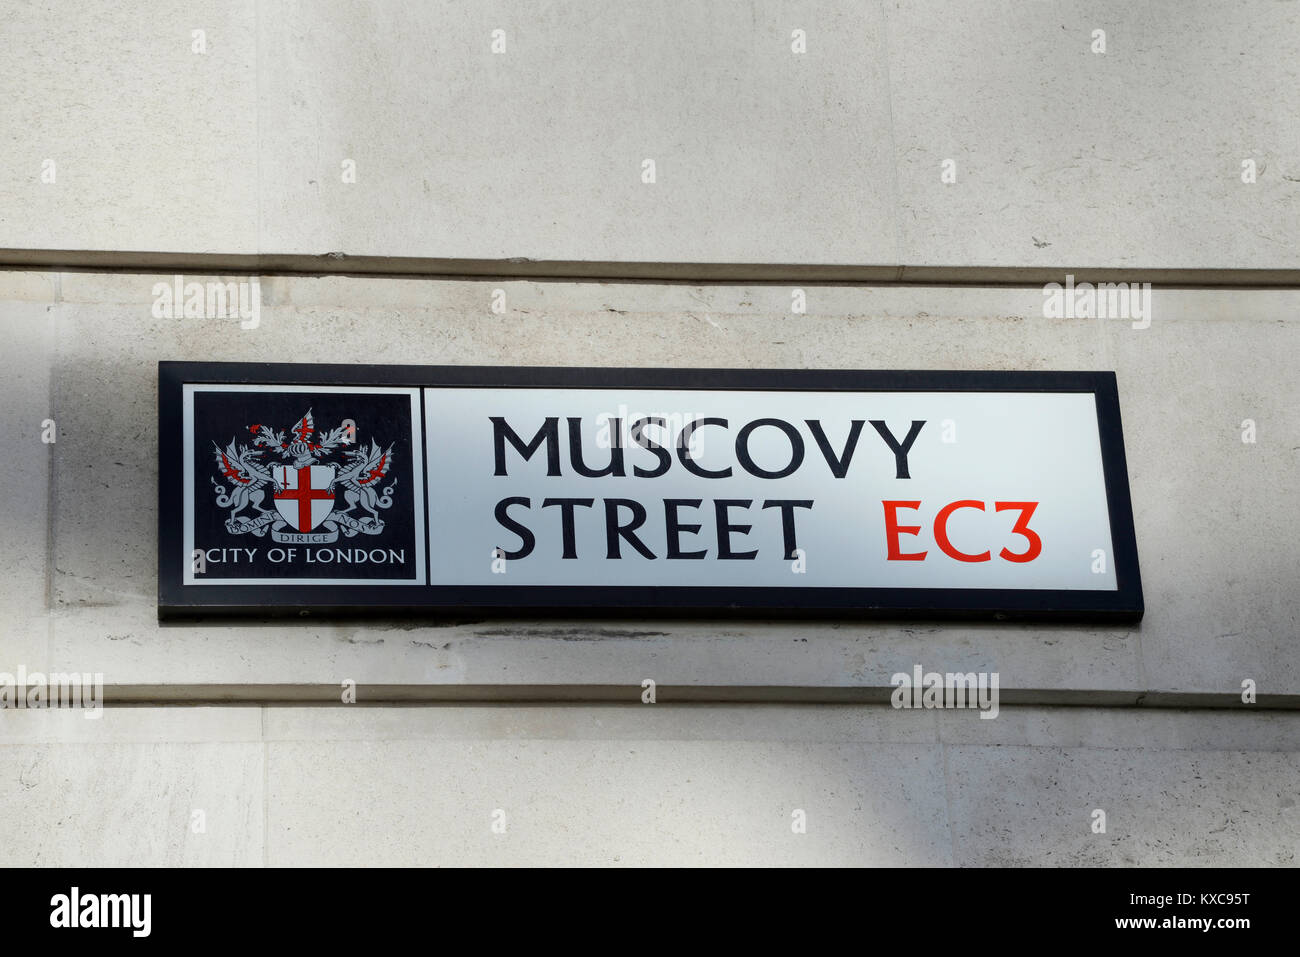 Muscovy Street EC3 City of London Street Sign Road sign London, UK Banque D'Images